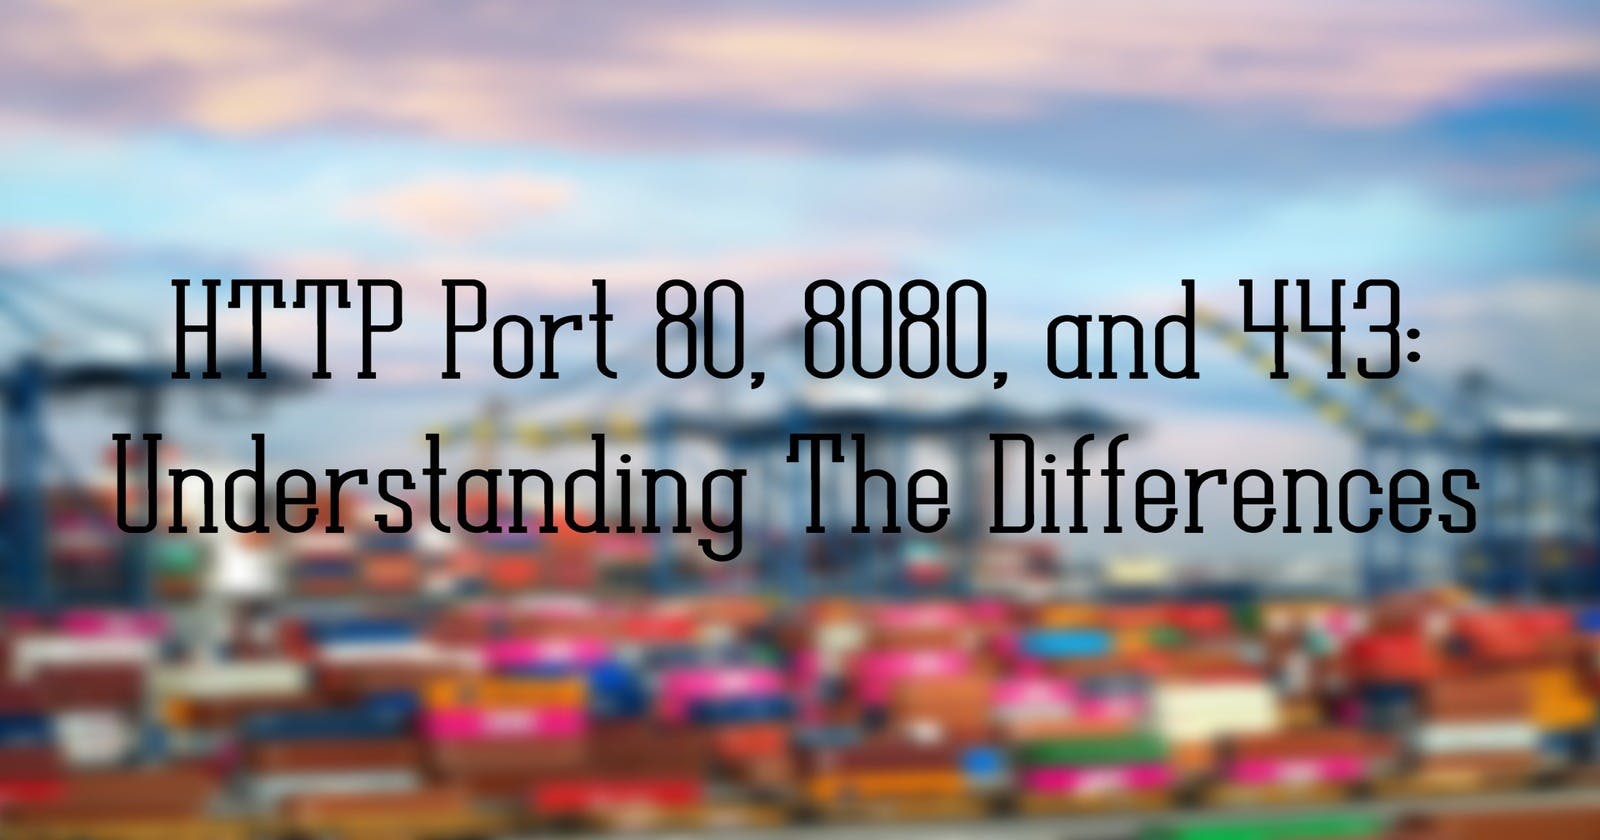 HTTP Port 80, 8080, and 443: Understanding The Differences